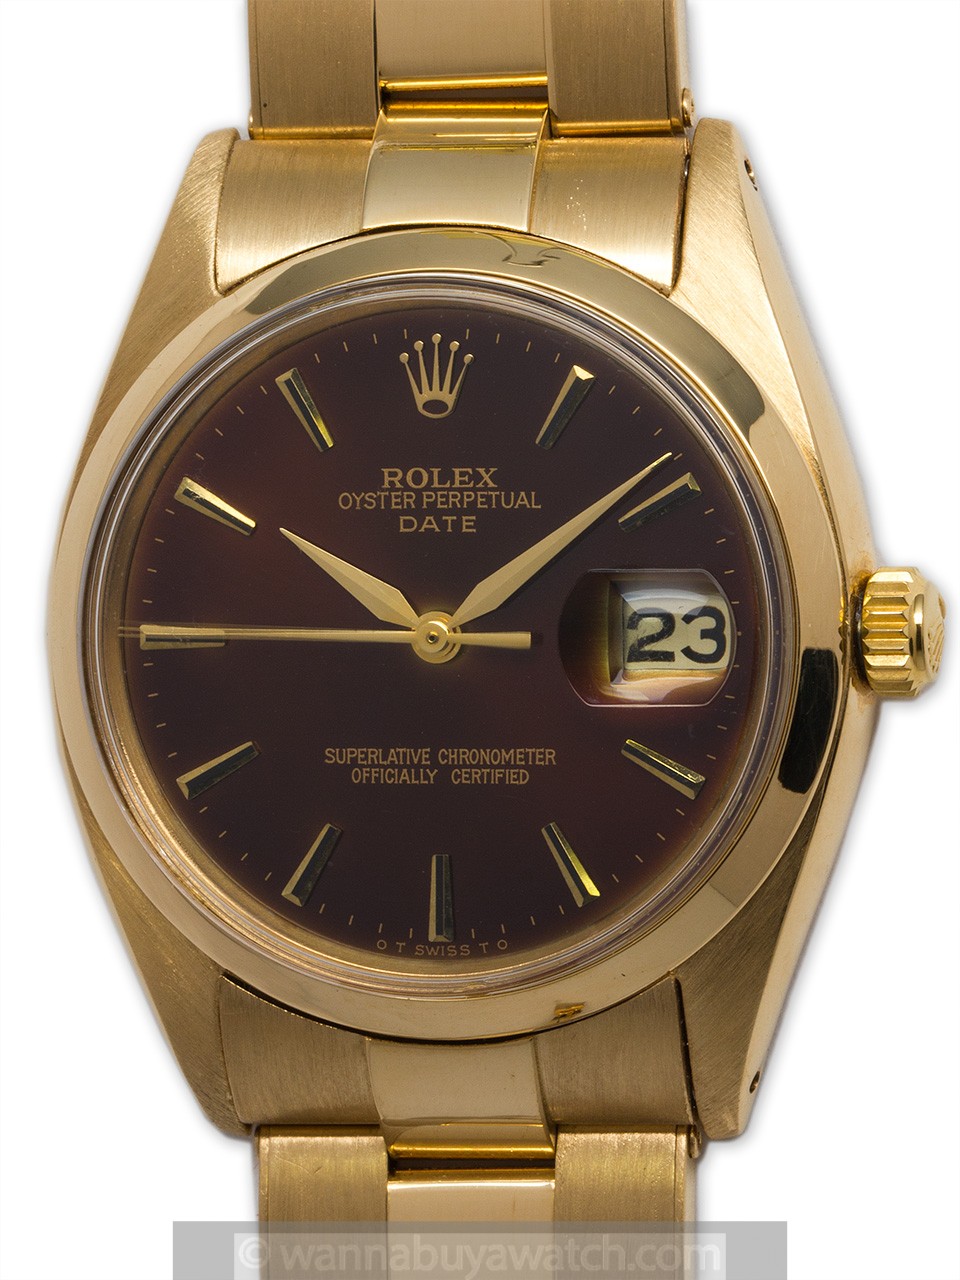 Rolex 18K YG Oyster Perpetual Date circa 1978 “Rootbeer”